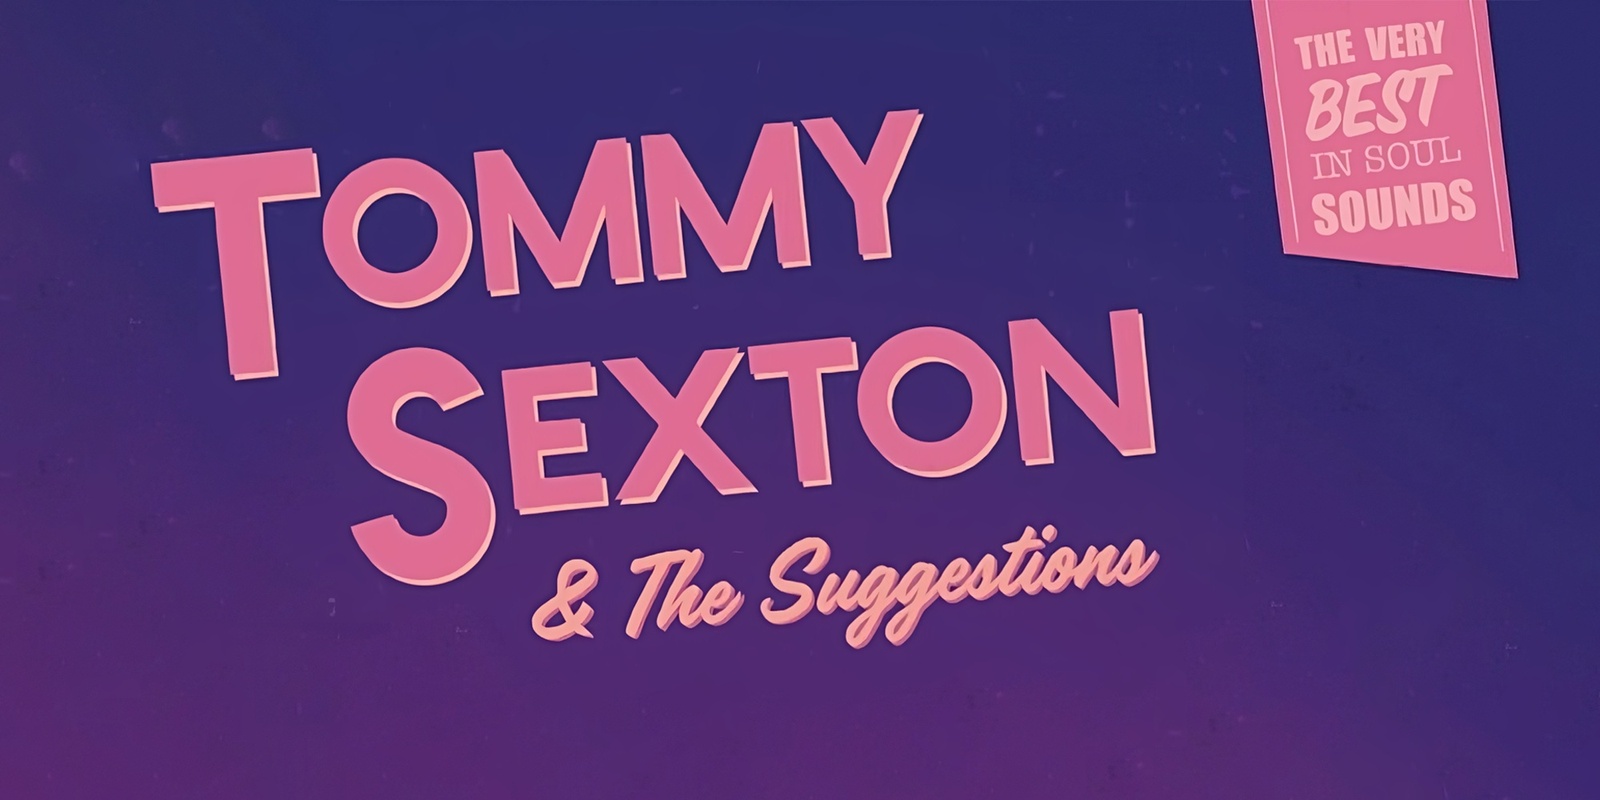 Tommy Sexton & The Suggestions 